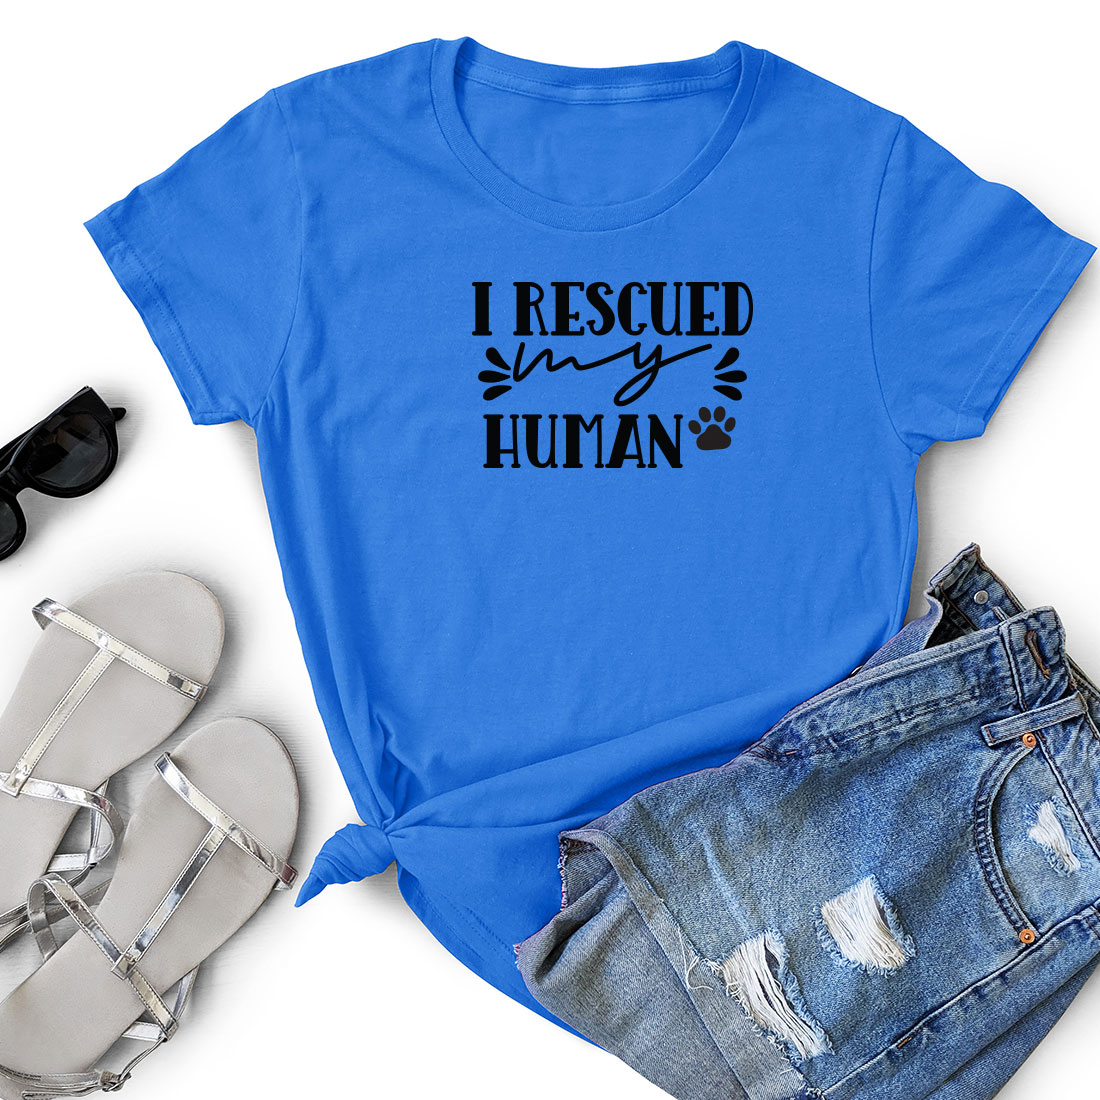 T - shirt that says i rescue my human next to a pair of shorts.